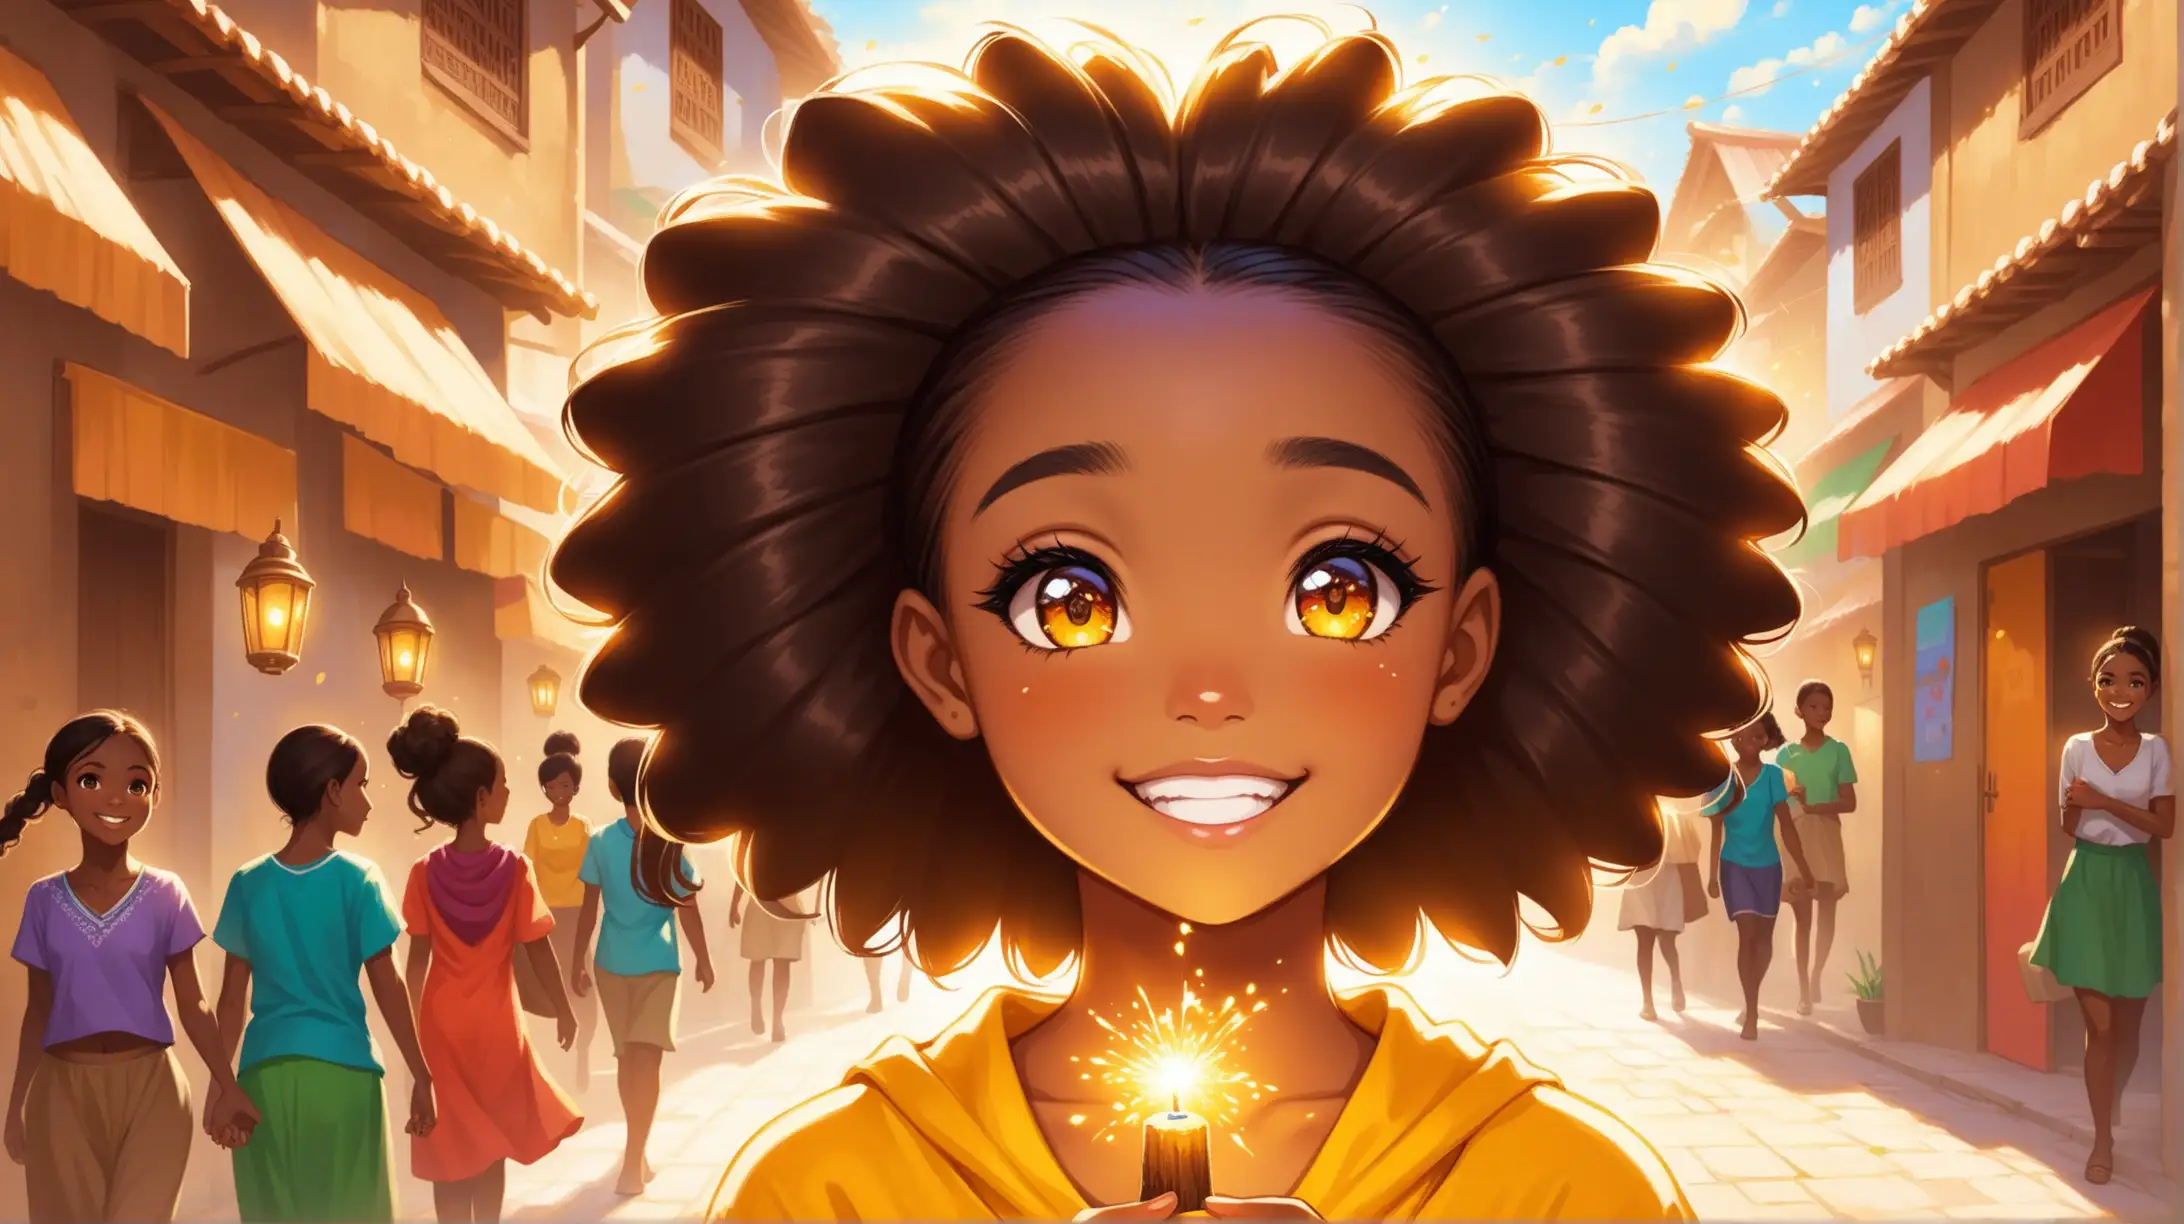 Lily a cheerful light skin ebony girl with a spark of kindness in her eyes, is helping people of different backgrounds and cultures, each scene showcasing a different act of kindness